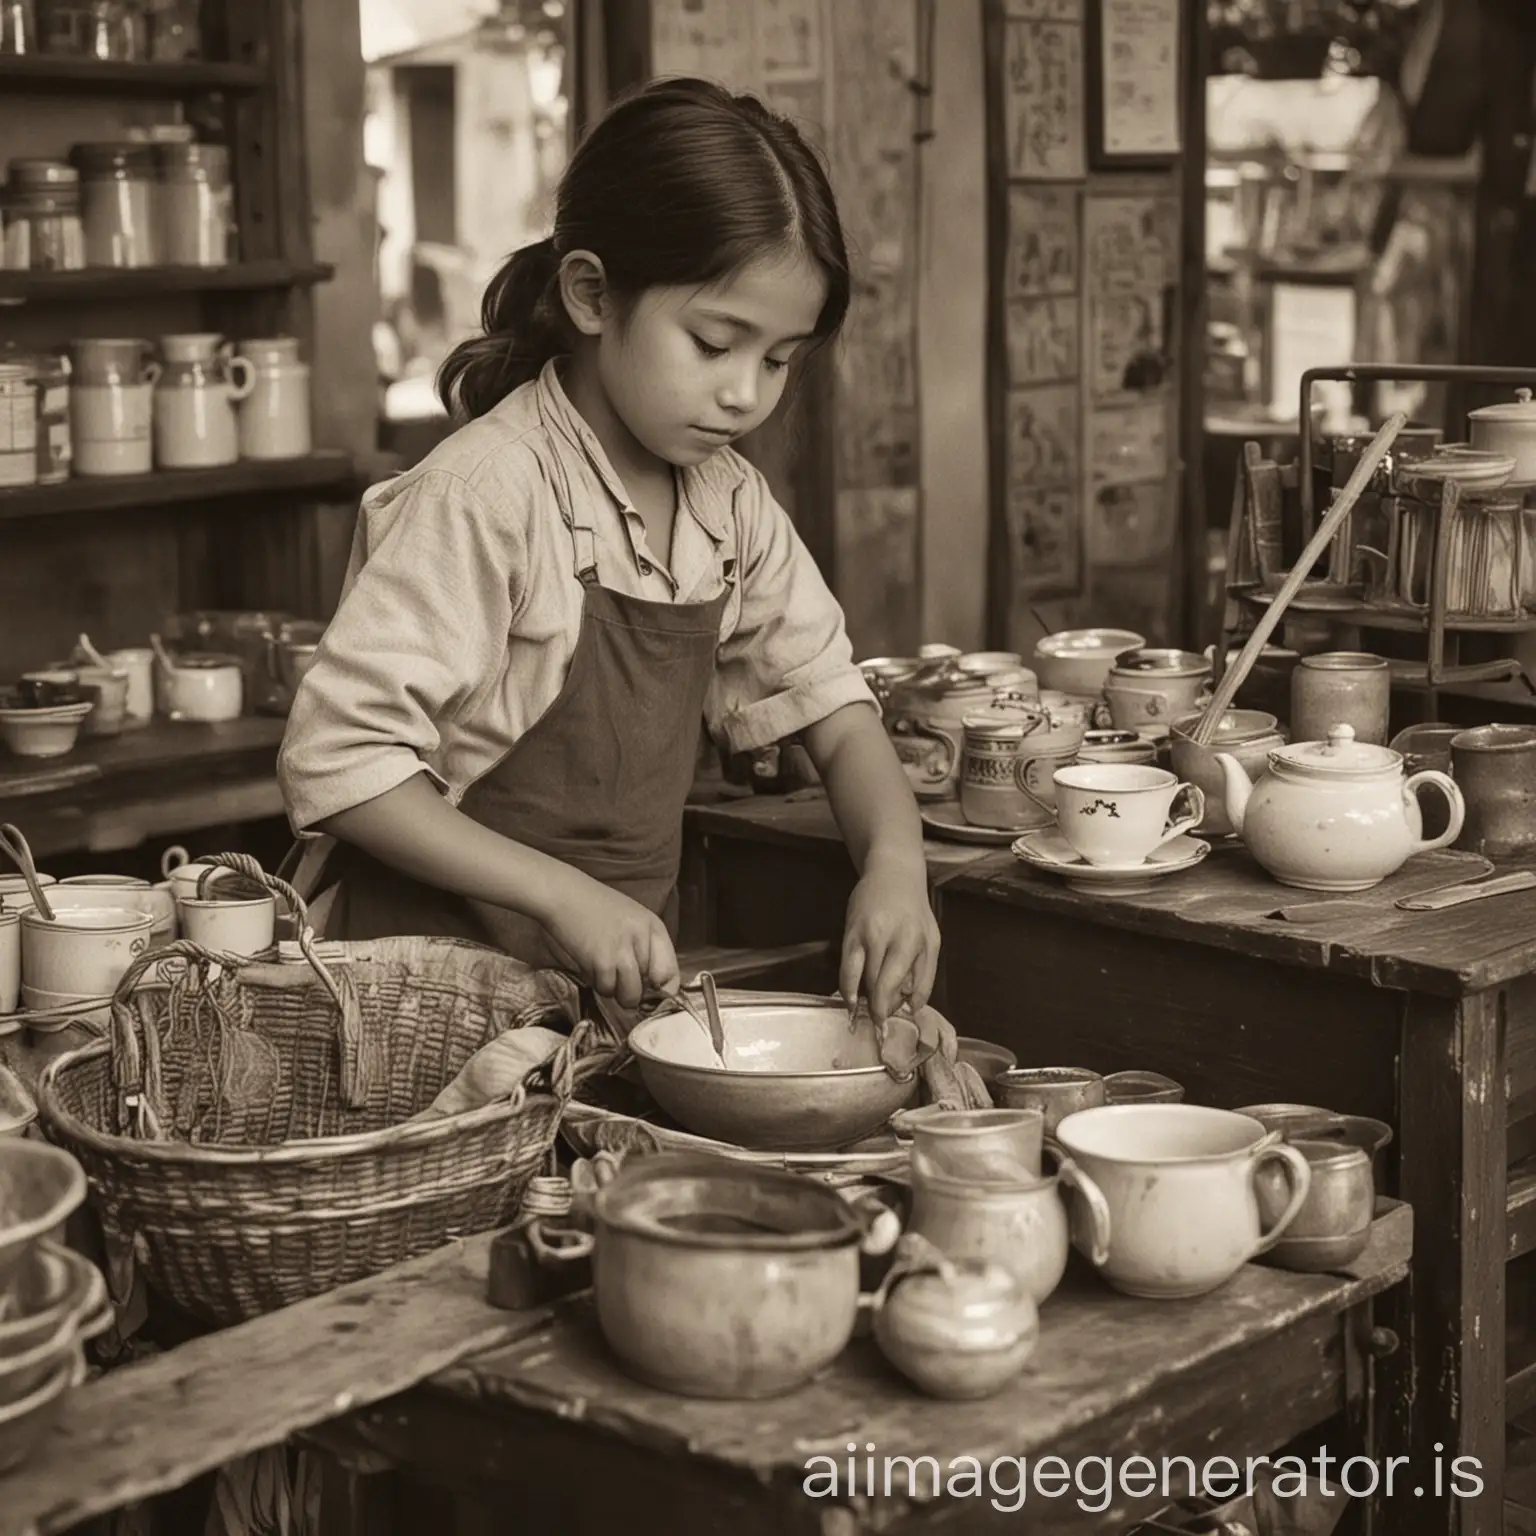 Child-Labor-at-a-Traditional-Tea-Shop-Young-Worker-Serving-Customers-in-Vintage-Setting